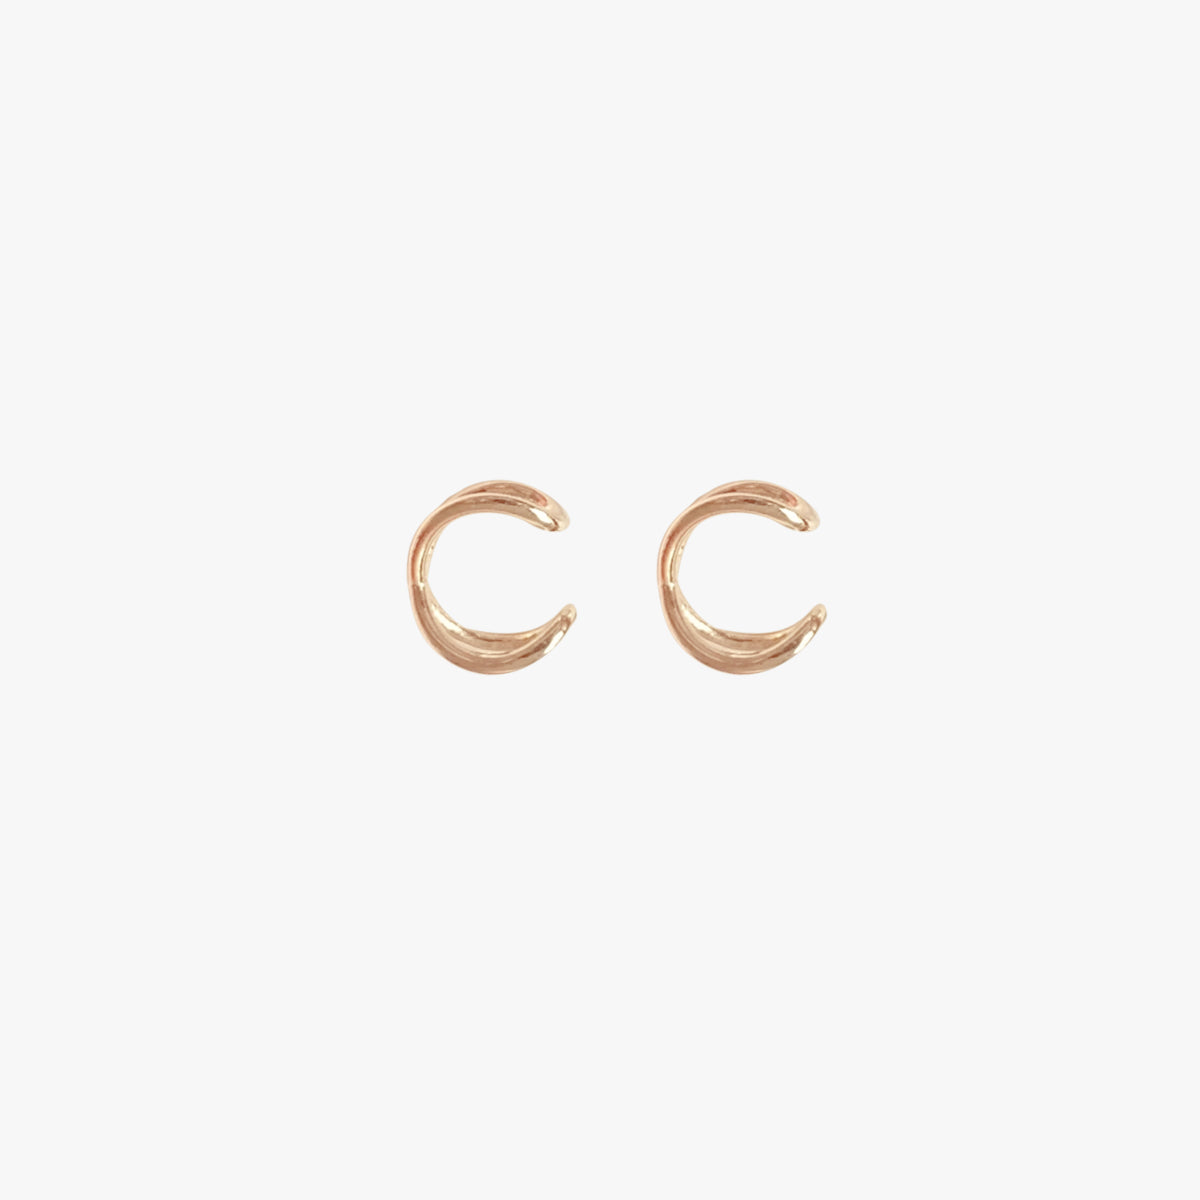 The Crissa Ear Cuff in Solid Gold